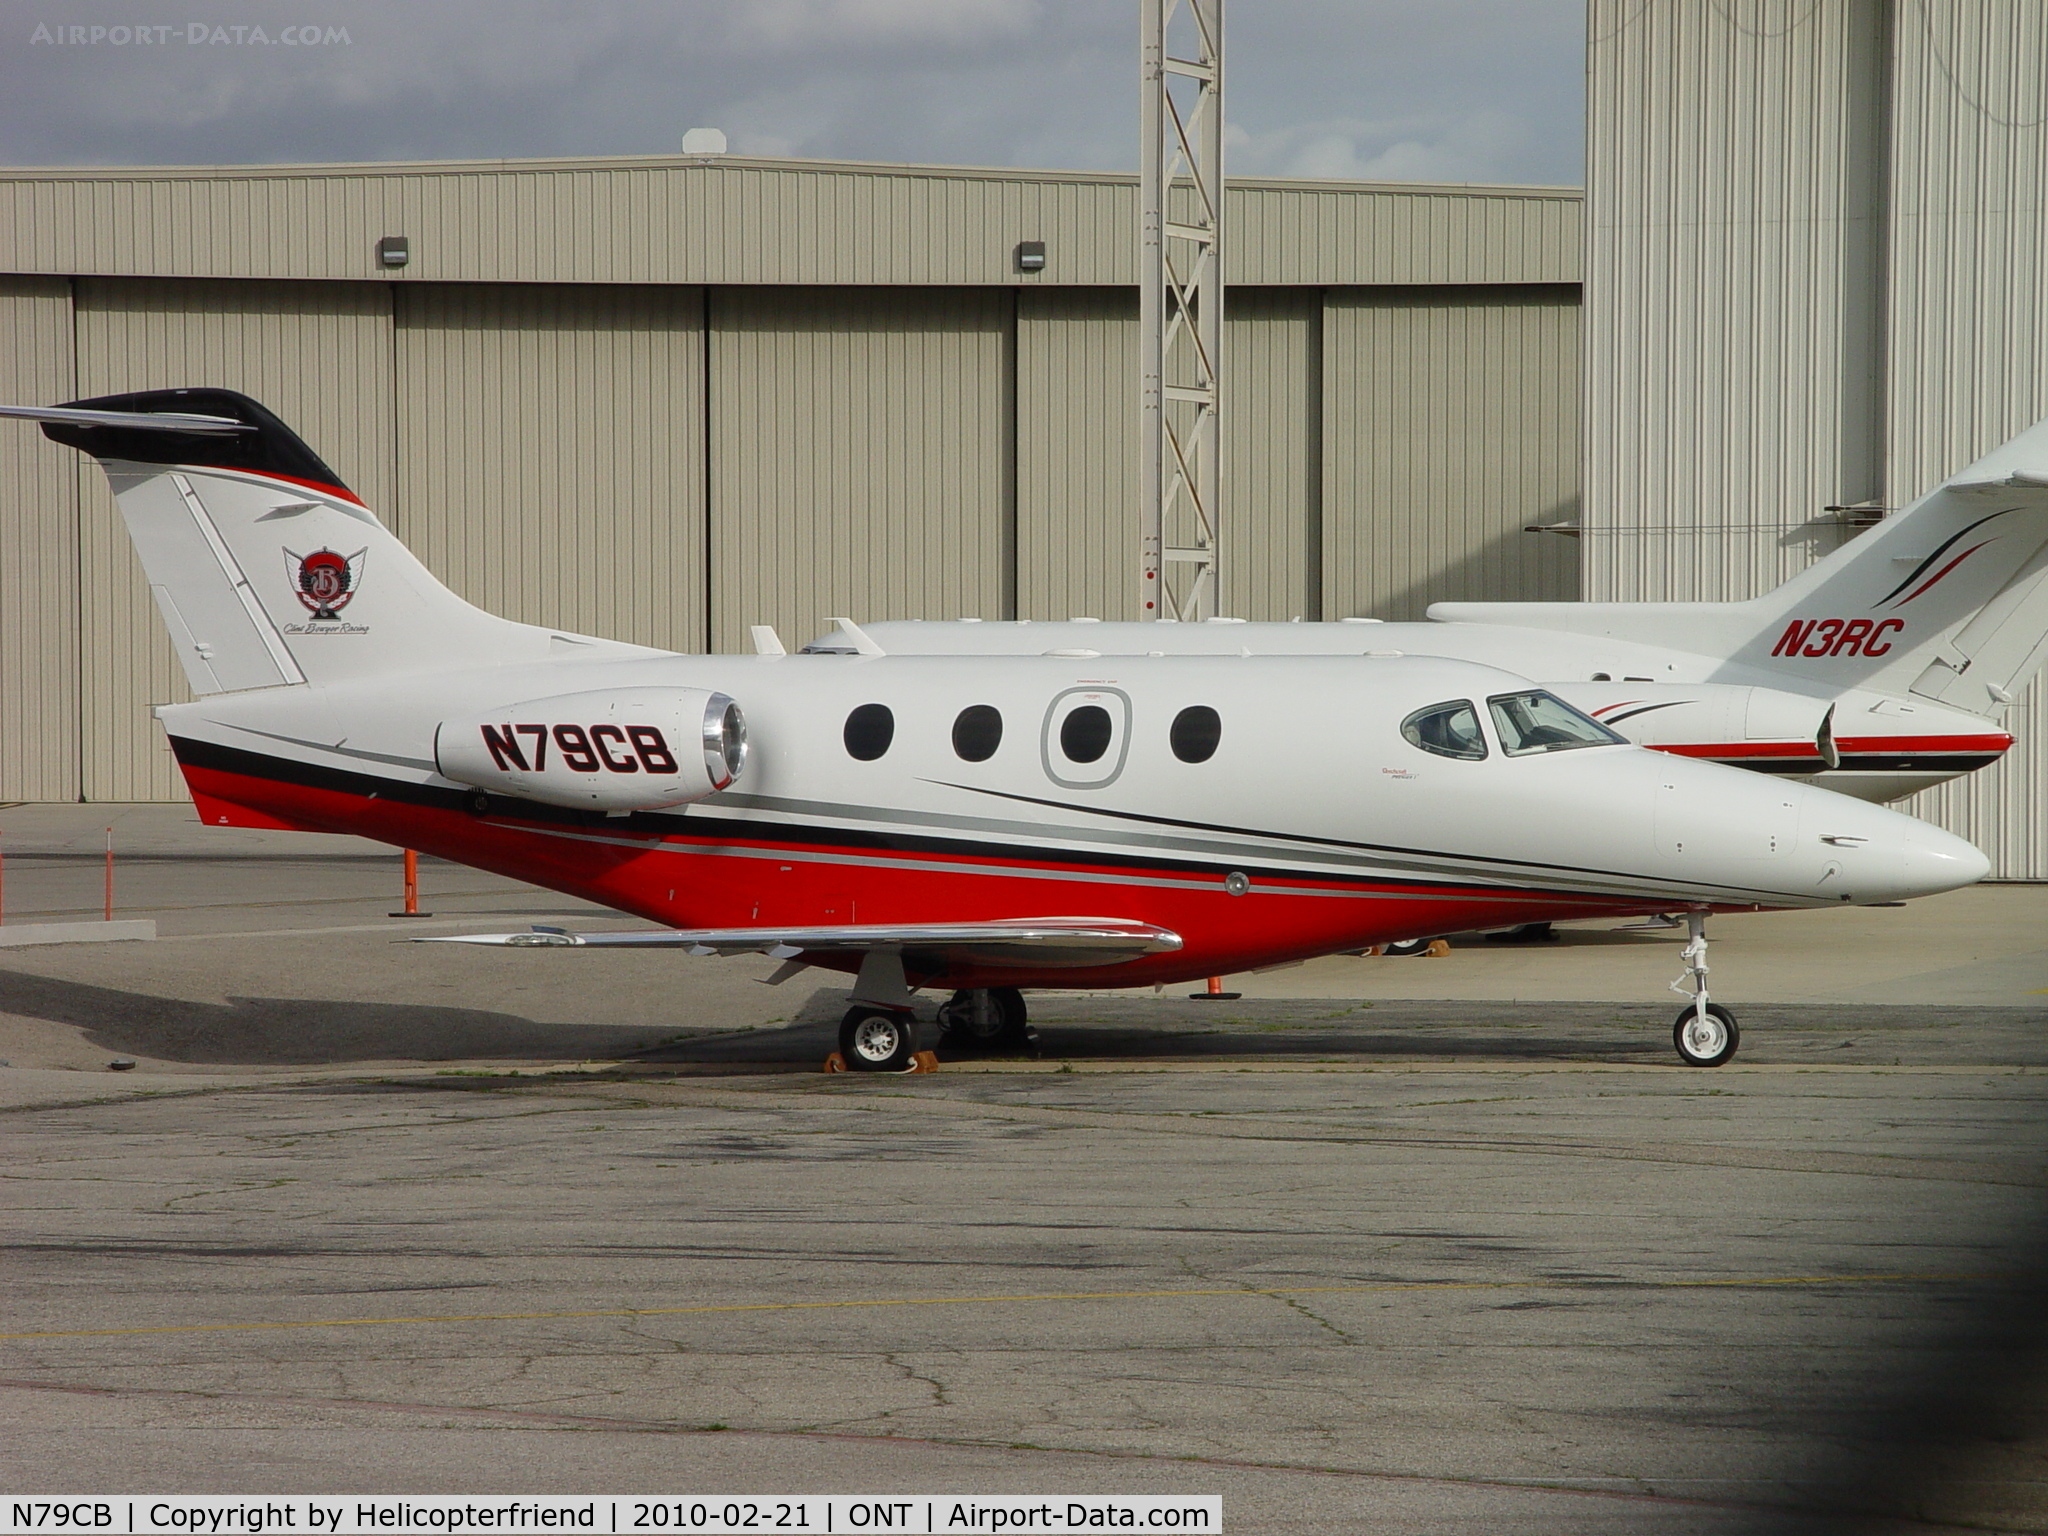 N79CB, Hawker Beechcraft Corp 390 C/N RB-264, Parked and waiting